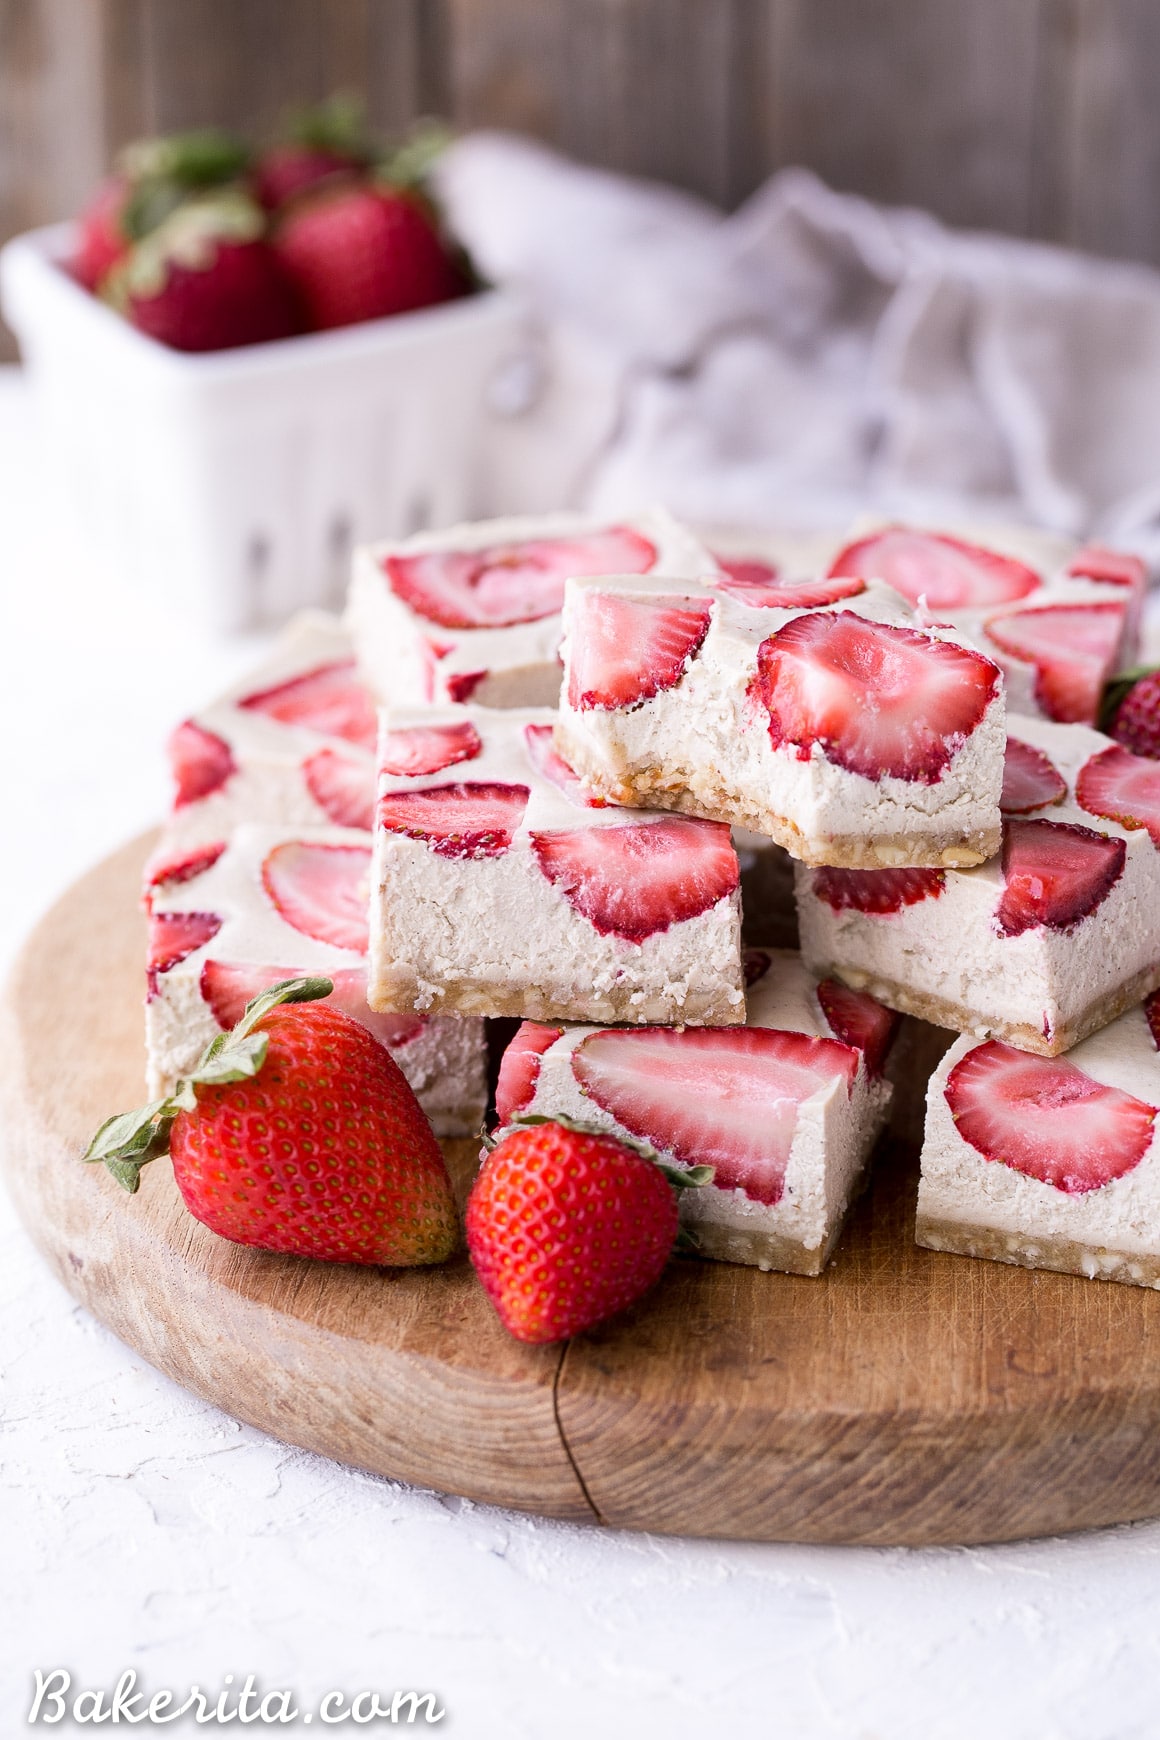 No-Bake Strawberry Shortcake Bars are incredibly creamy from the cashew base and taste just like strawberry shortcake! No baking necessary to make these gluten-free, Paleo, and vegan bars.